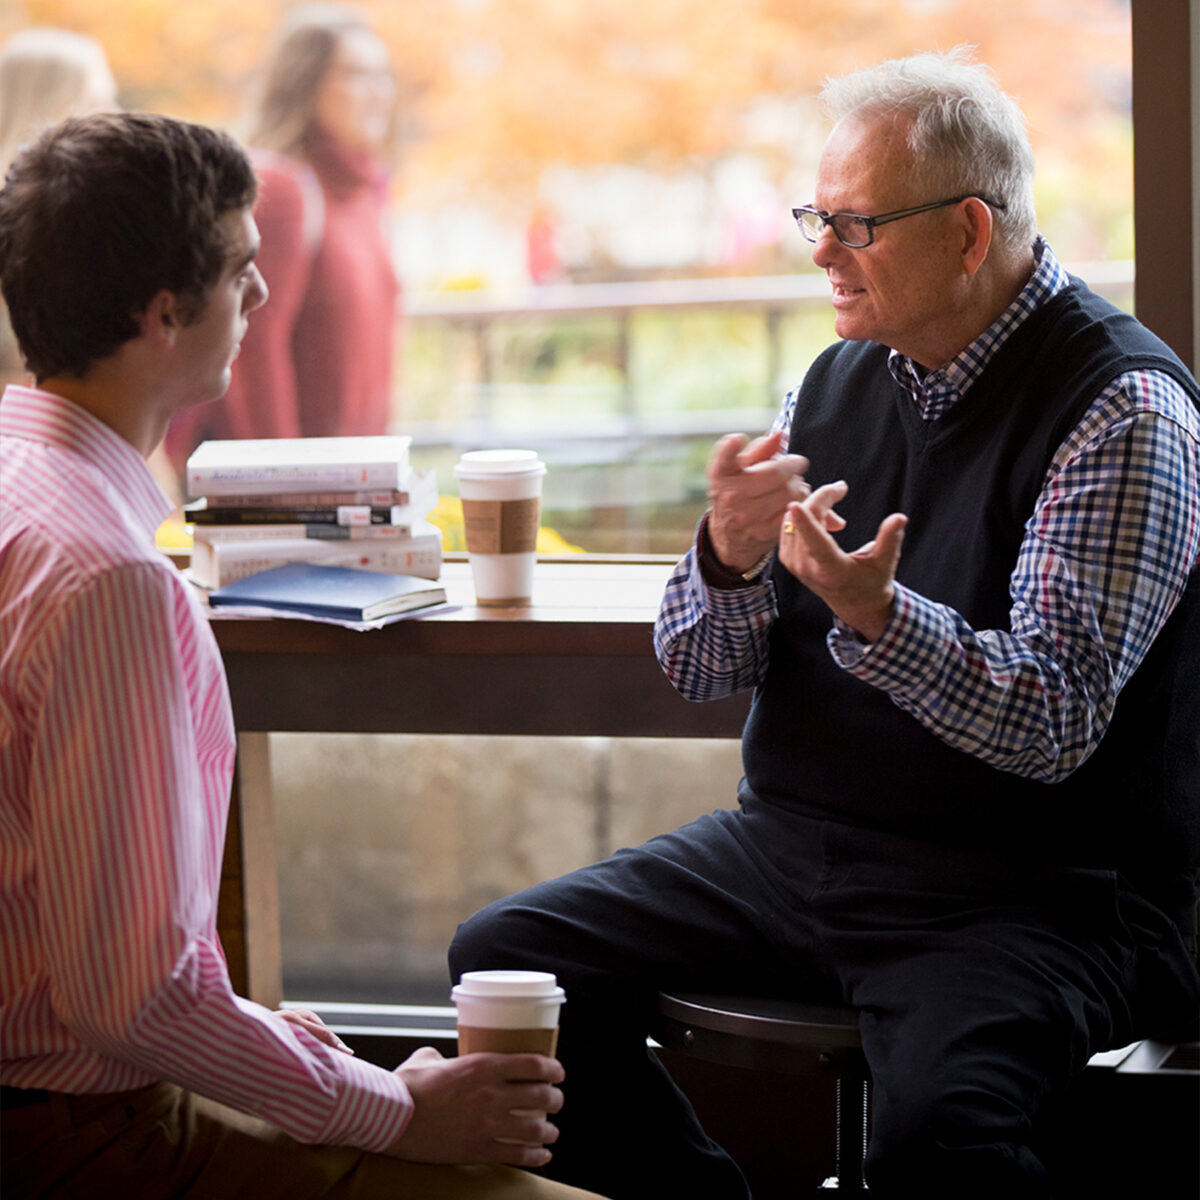 Professor engages in conversation with a student